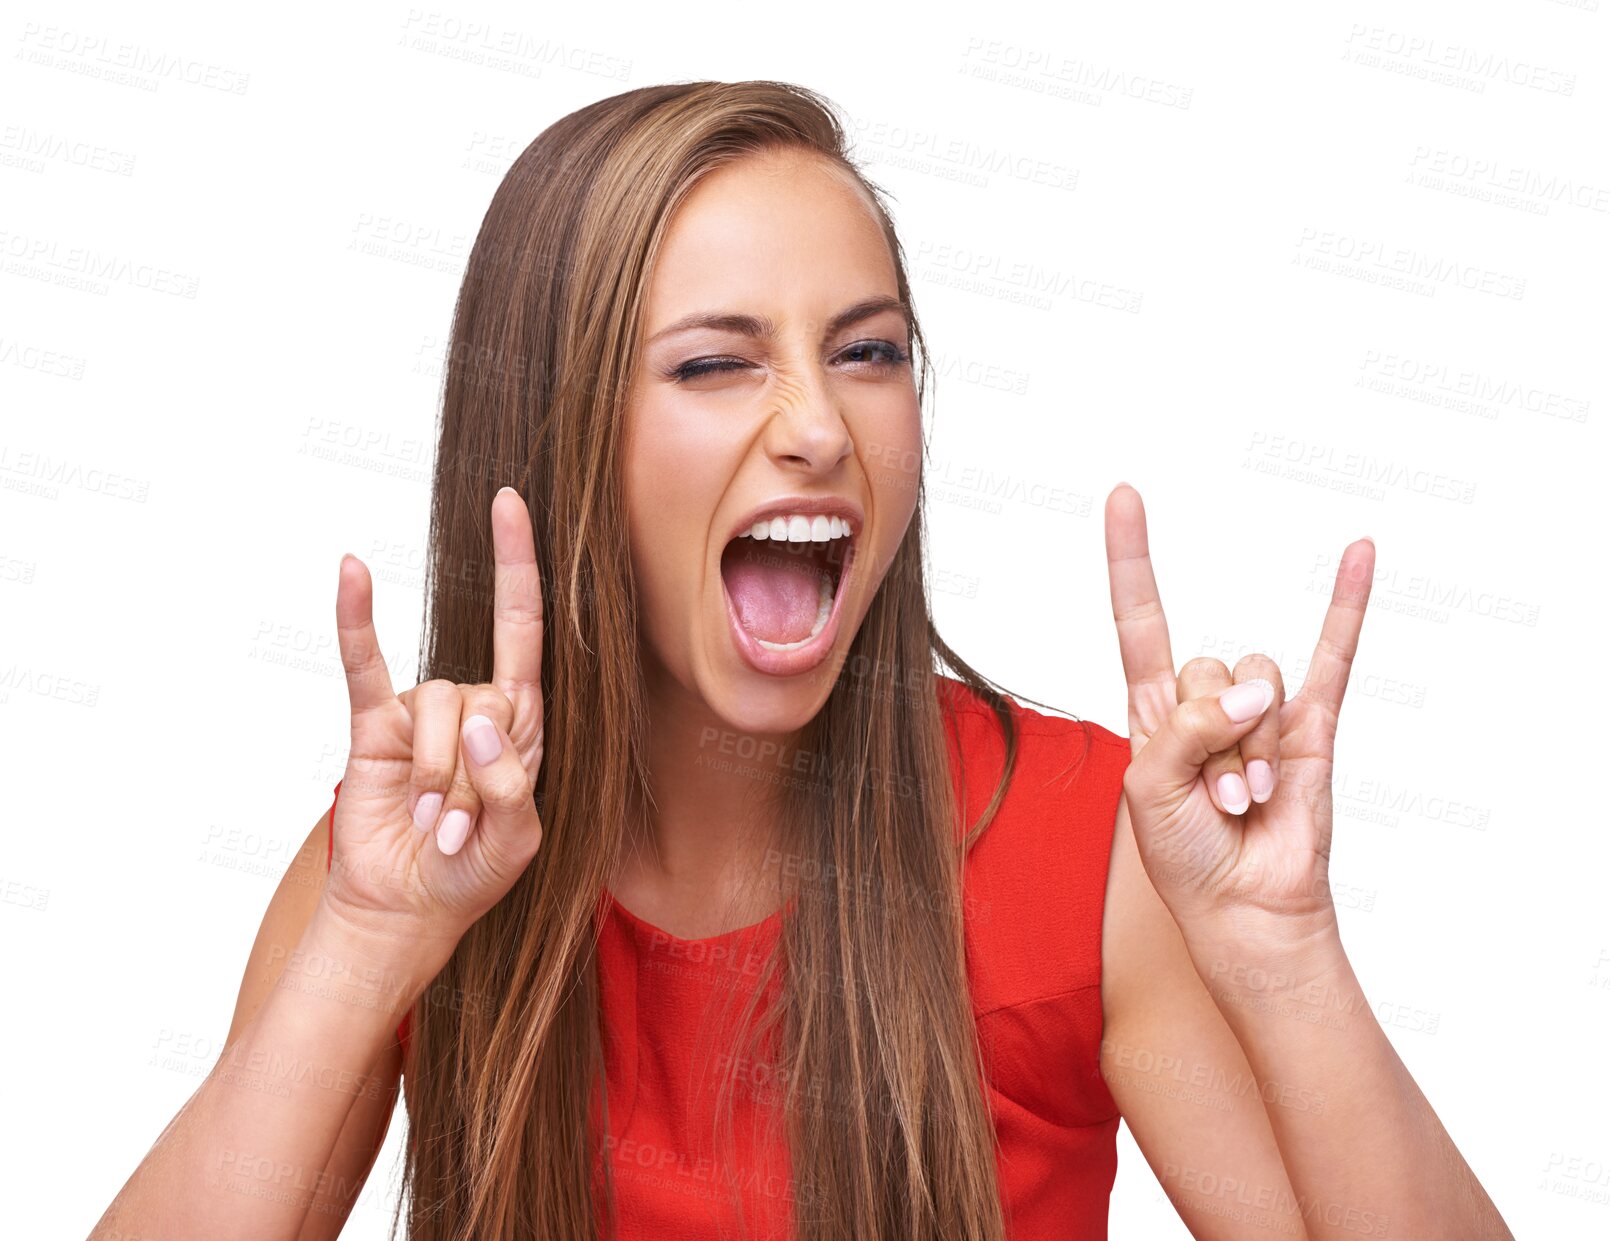 Buy stock photo Rock, hand sign and portrait of woman for freedom, energy and heavy metal music. Female with funny expression, comic or face emoji of girl with punk gesture isolated on a transparent PNG background